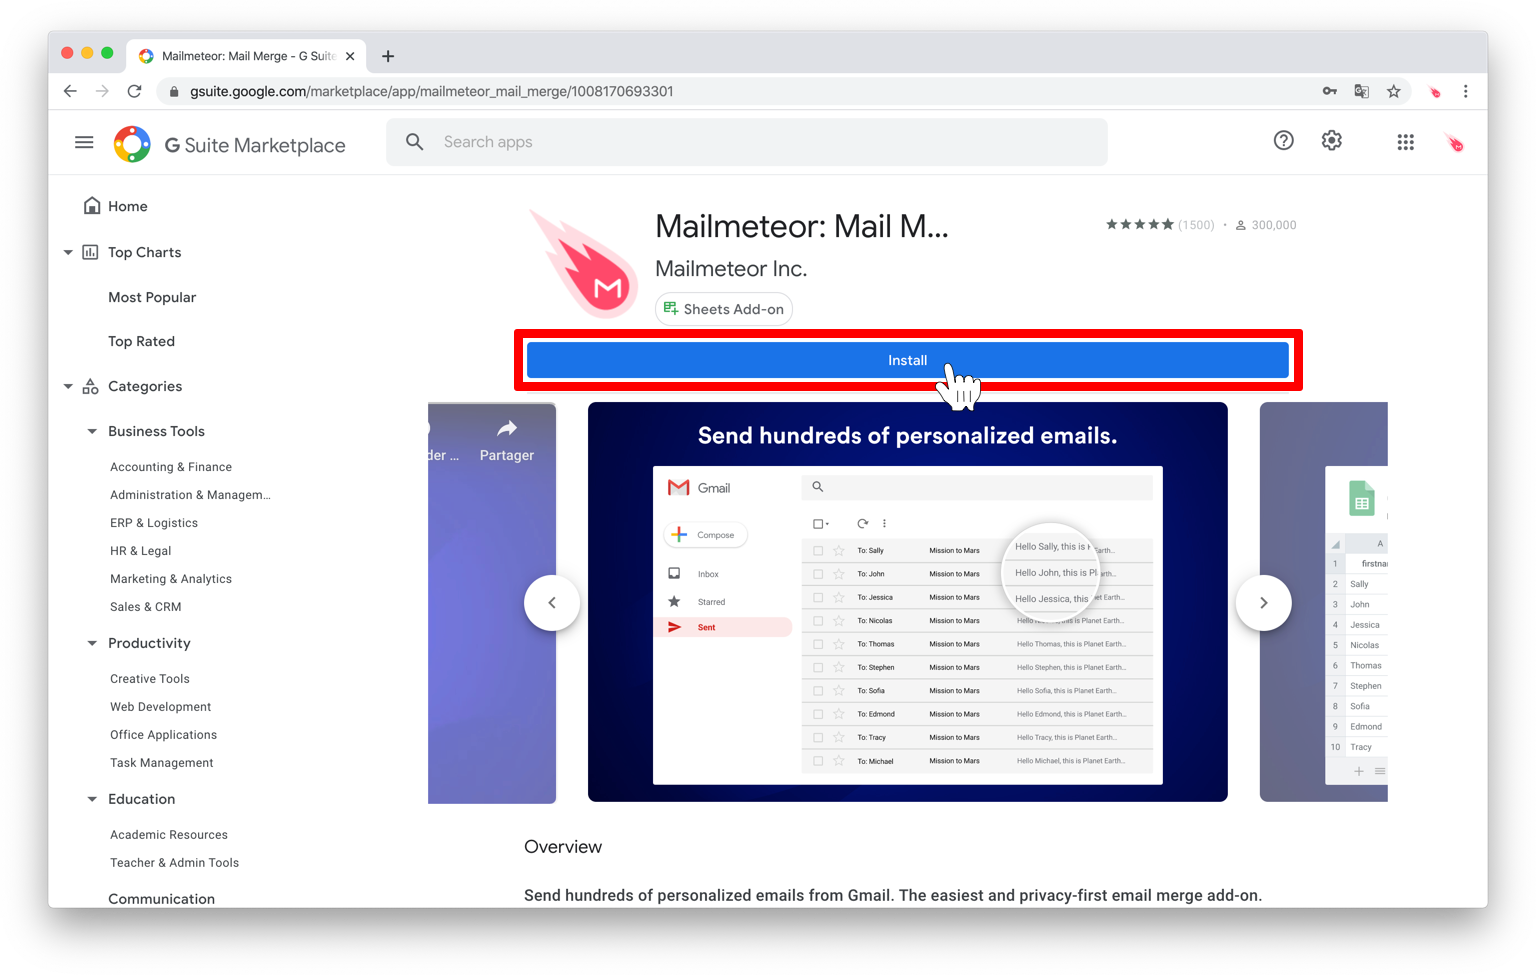 Install Mailmeteor’s add-on to start your mail merge from Google Sheets